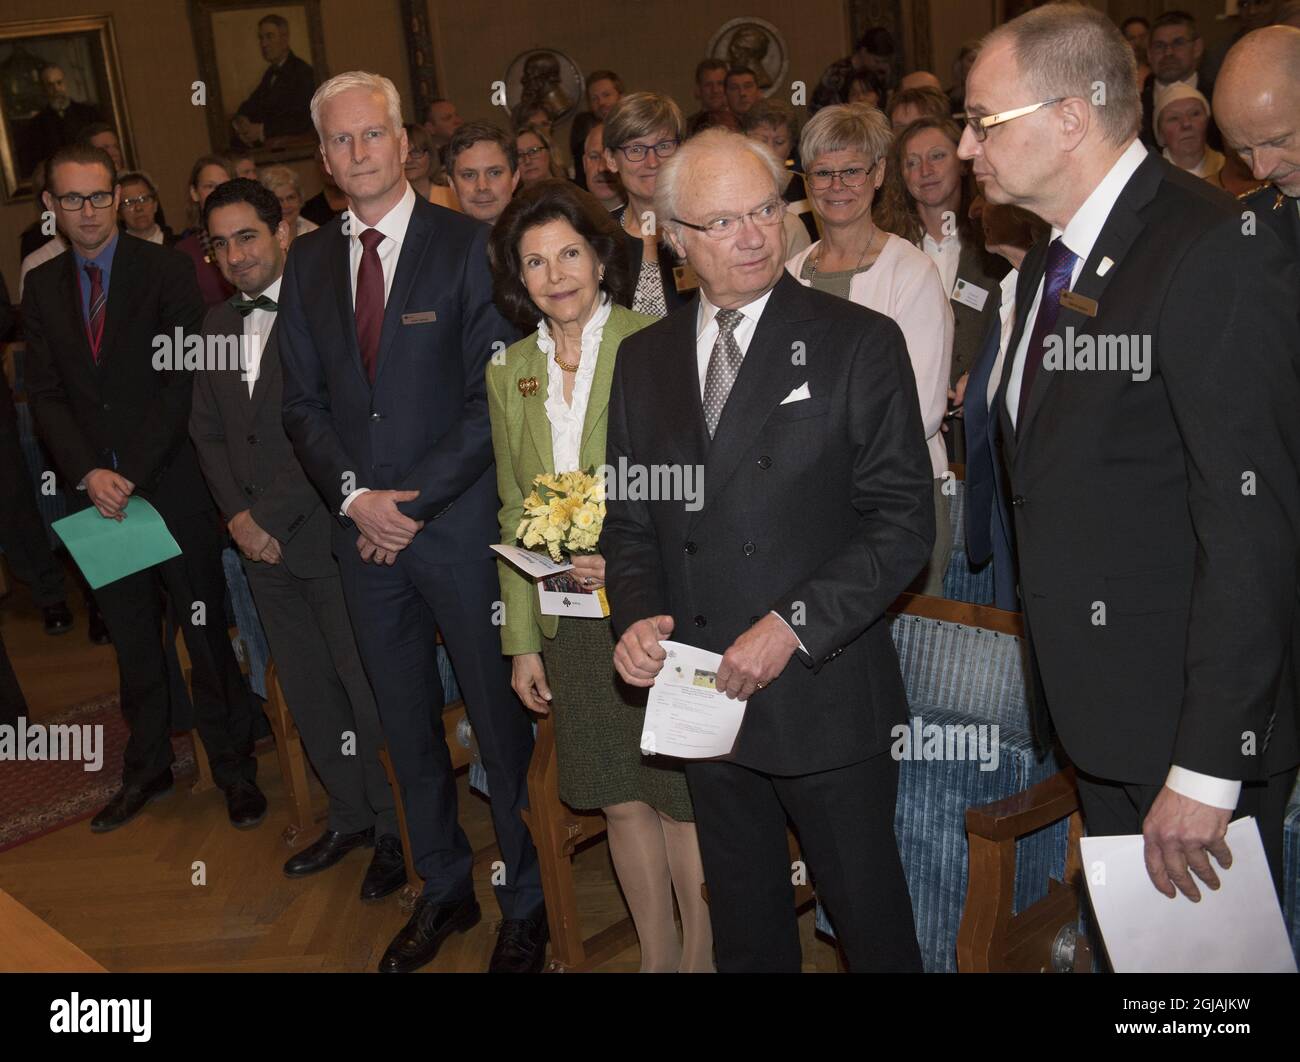 STOCKHOLM 2017-03-27 Queen Silvia and King Carl Gustaf are seen at the annual medal ceremony for the Swedish Diary farmers. 35 farmers received a gold medal for delivering excellent milk during 23 years. Sandberg/TT/10080  Stock Photo